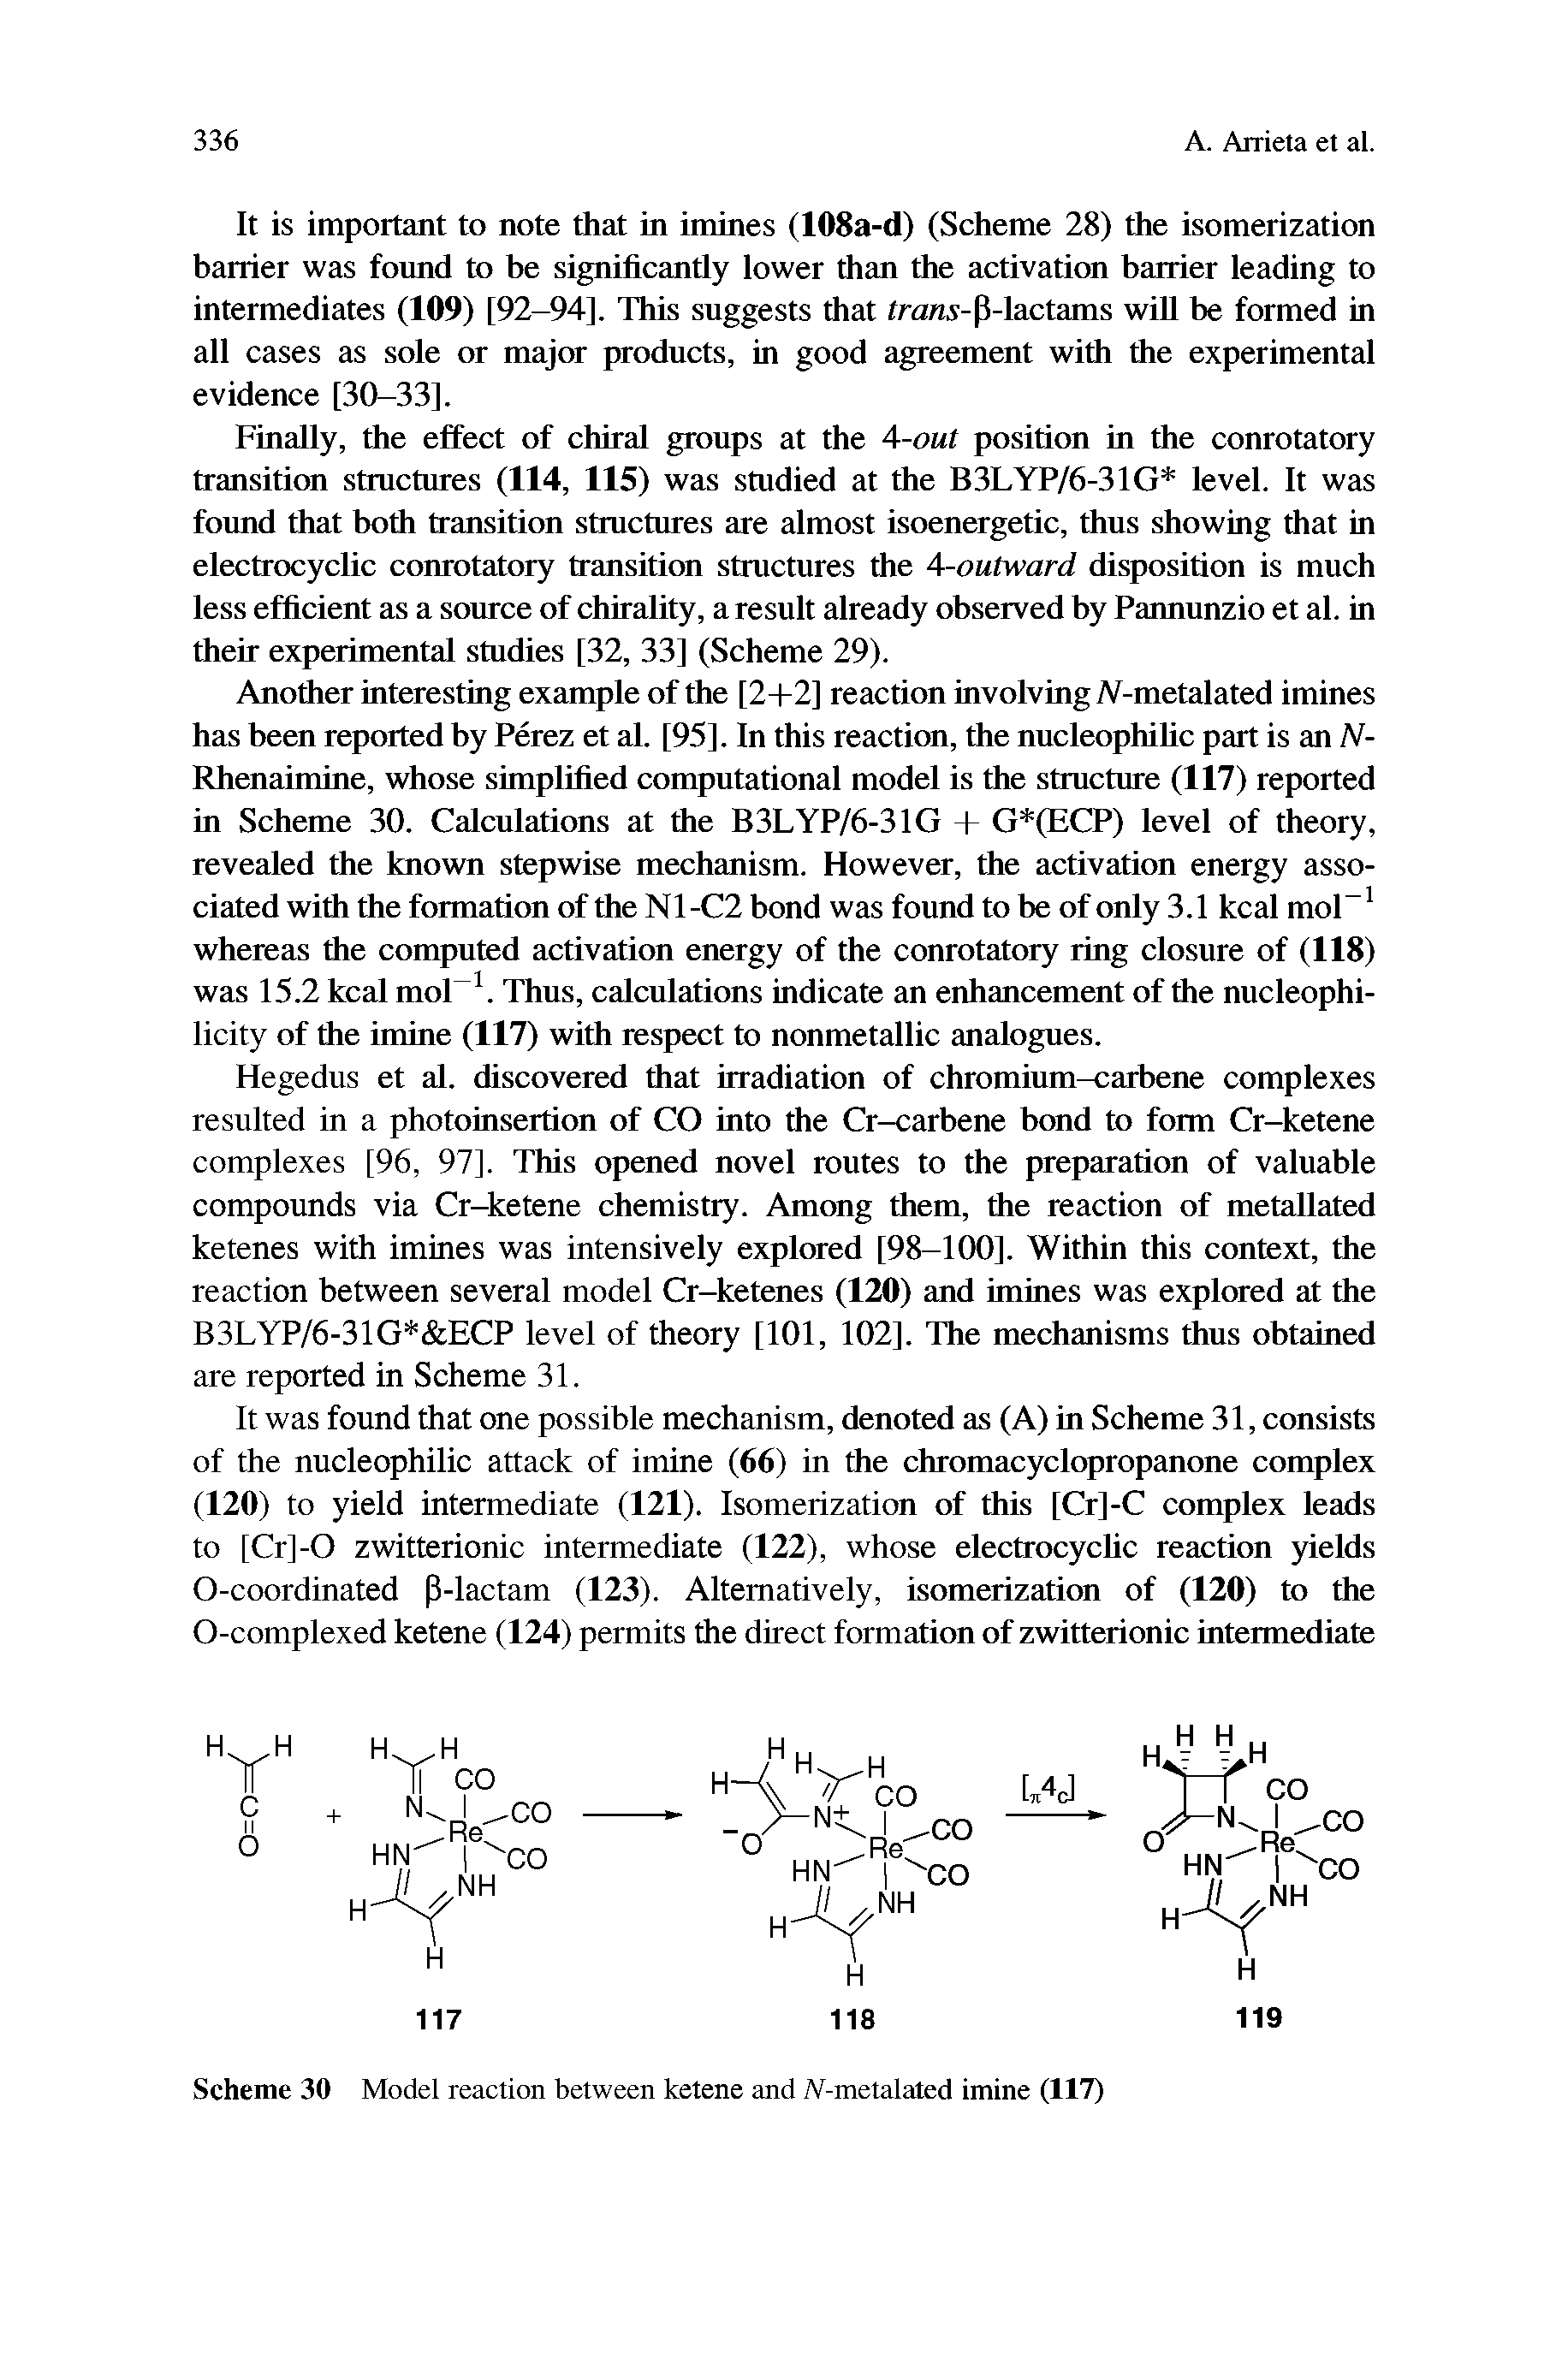 Scheme 30 Model reaction between ketene and A-metalated imine (117)...